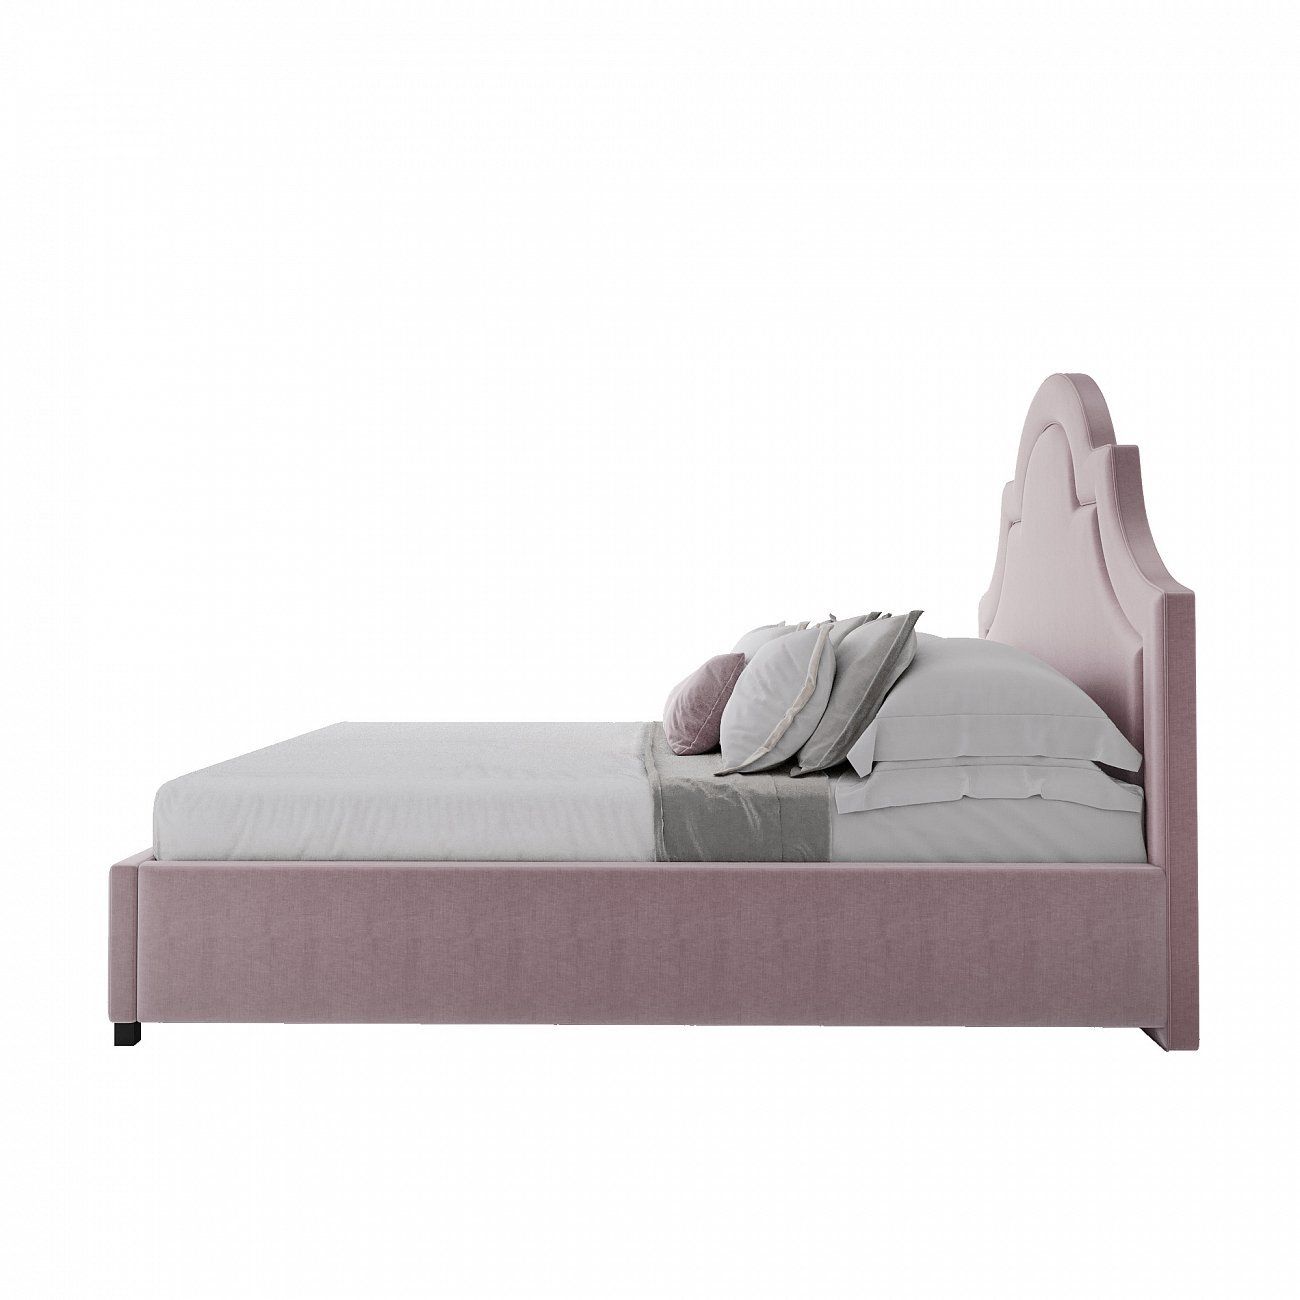 Double bed 160x200 cm pink Kennedy